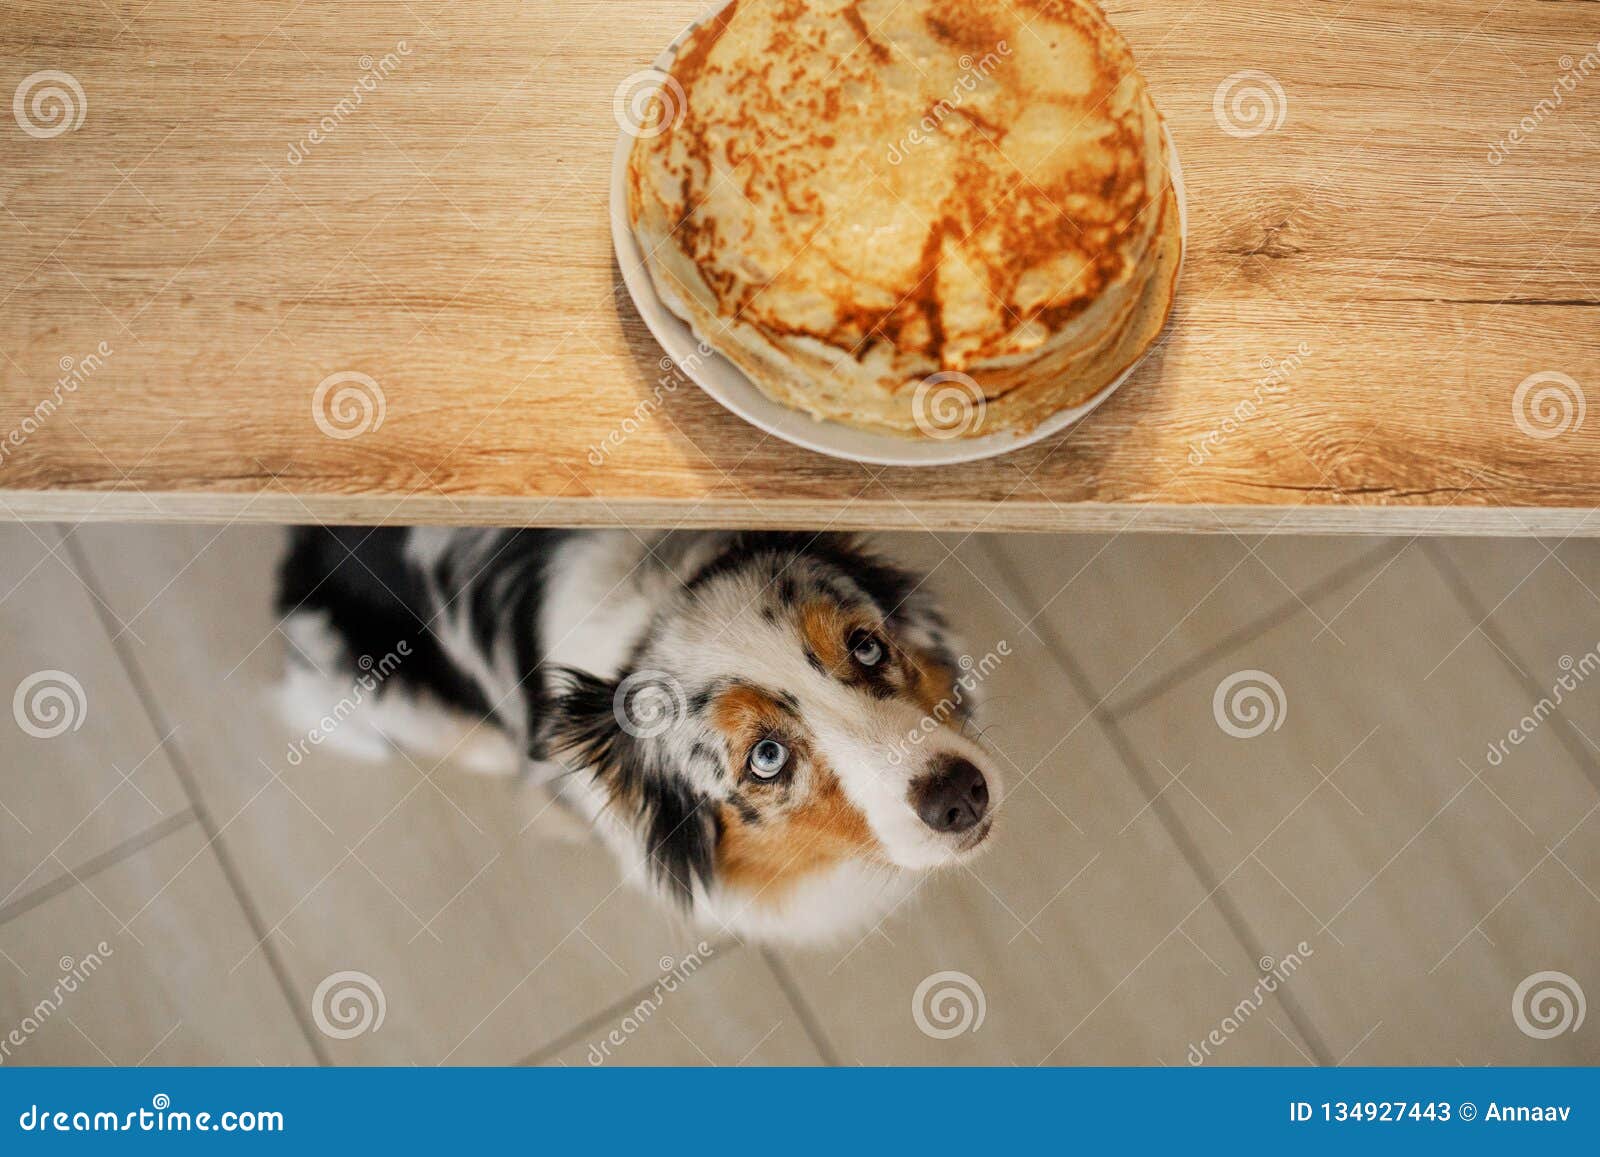 Opdater Refinement Ydmyg Dog Looking at Food. the Australian Shepherd is Waiting for Pancakes. Pet  Eats Stock Image - Image of friend, exercise: 134927443